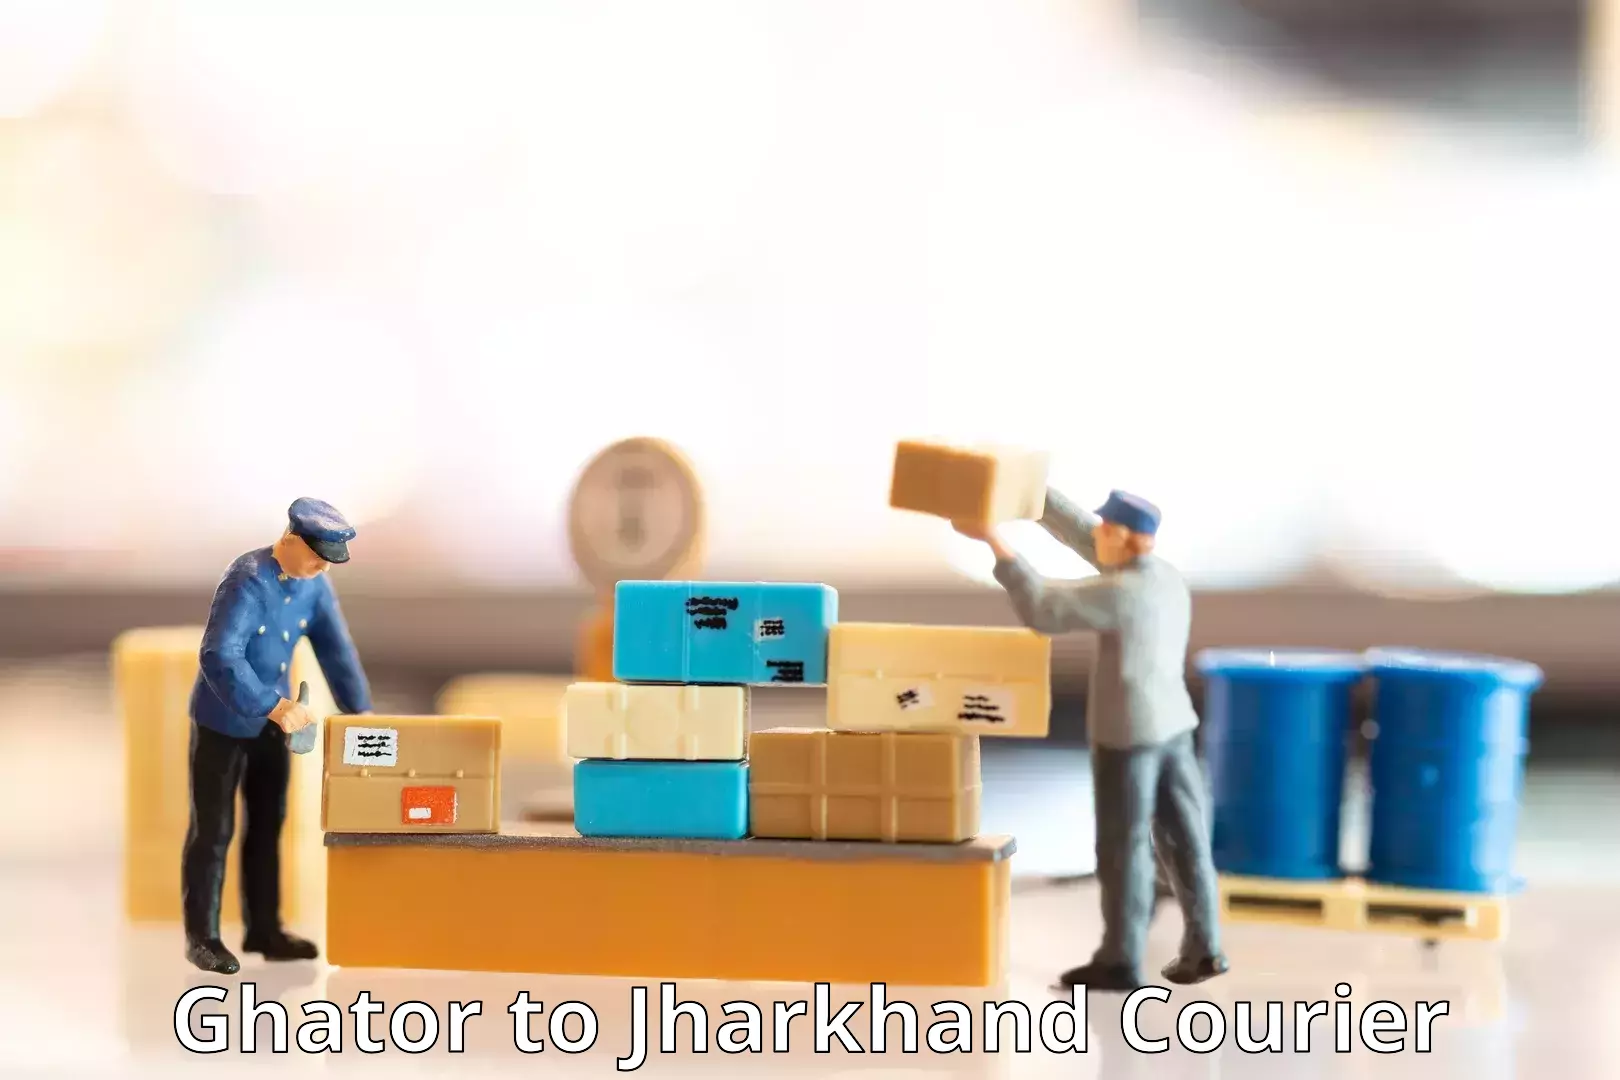 Nationwide courier service Ghator to Jharkhand